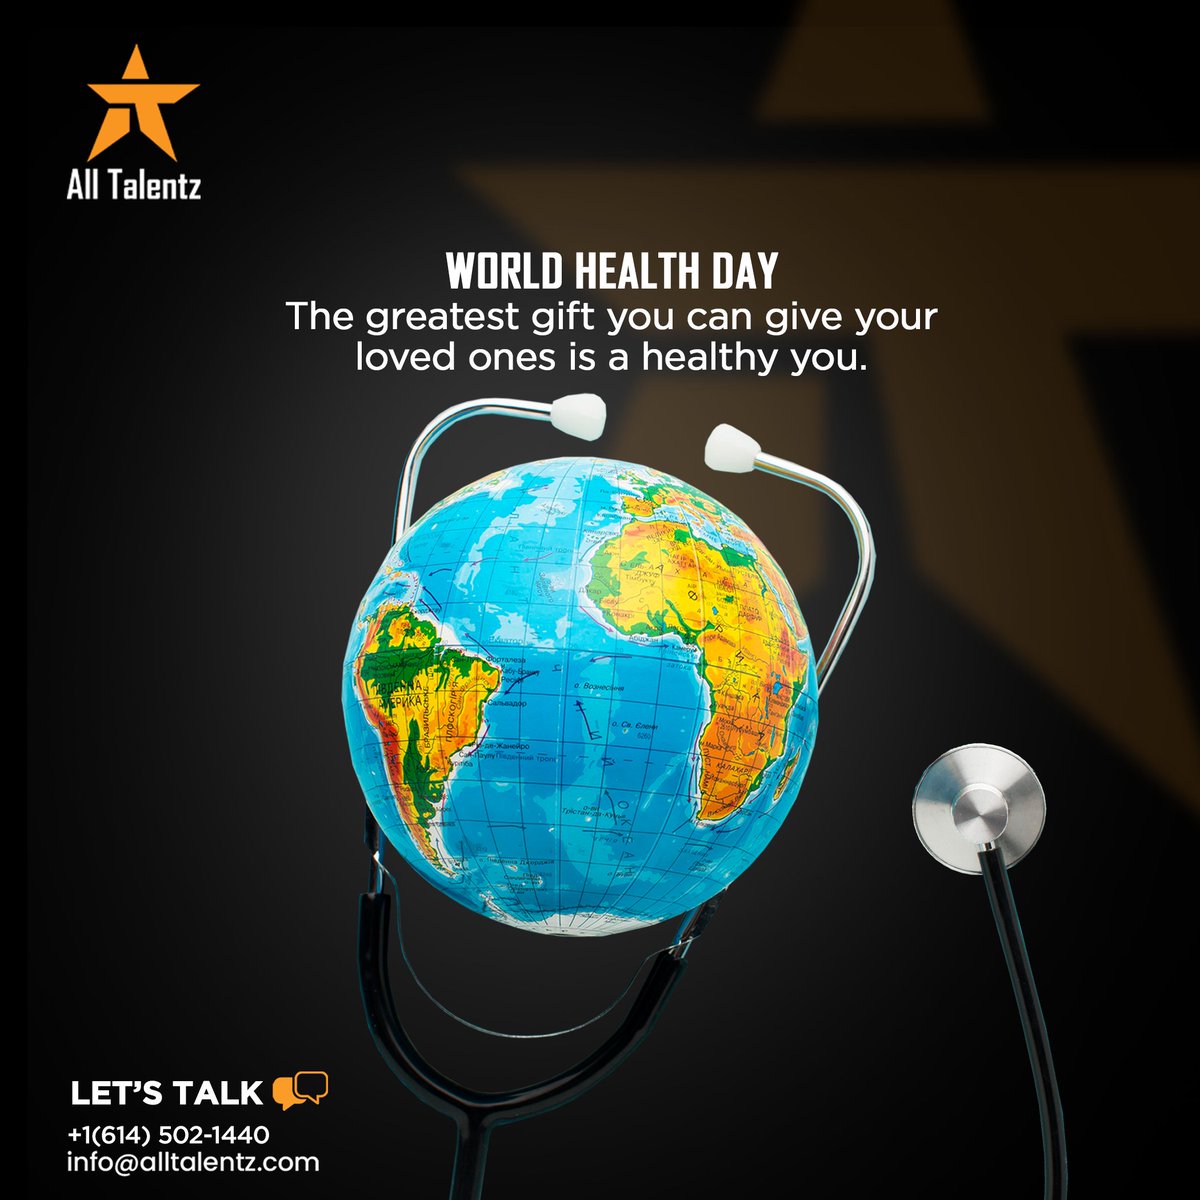 As we all know, the greatest wealth is sound health. Prioritize your health today.

#worldhealthday #healthday #prioritizeyourhealth #eathealthy